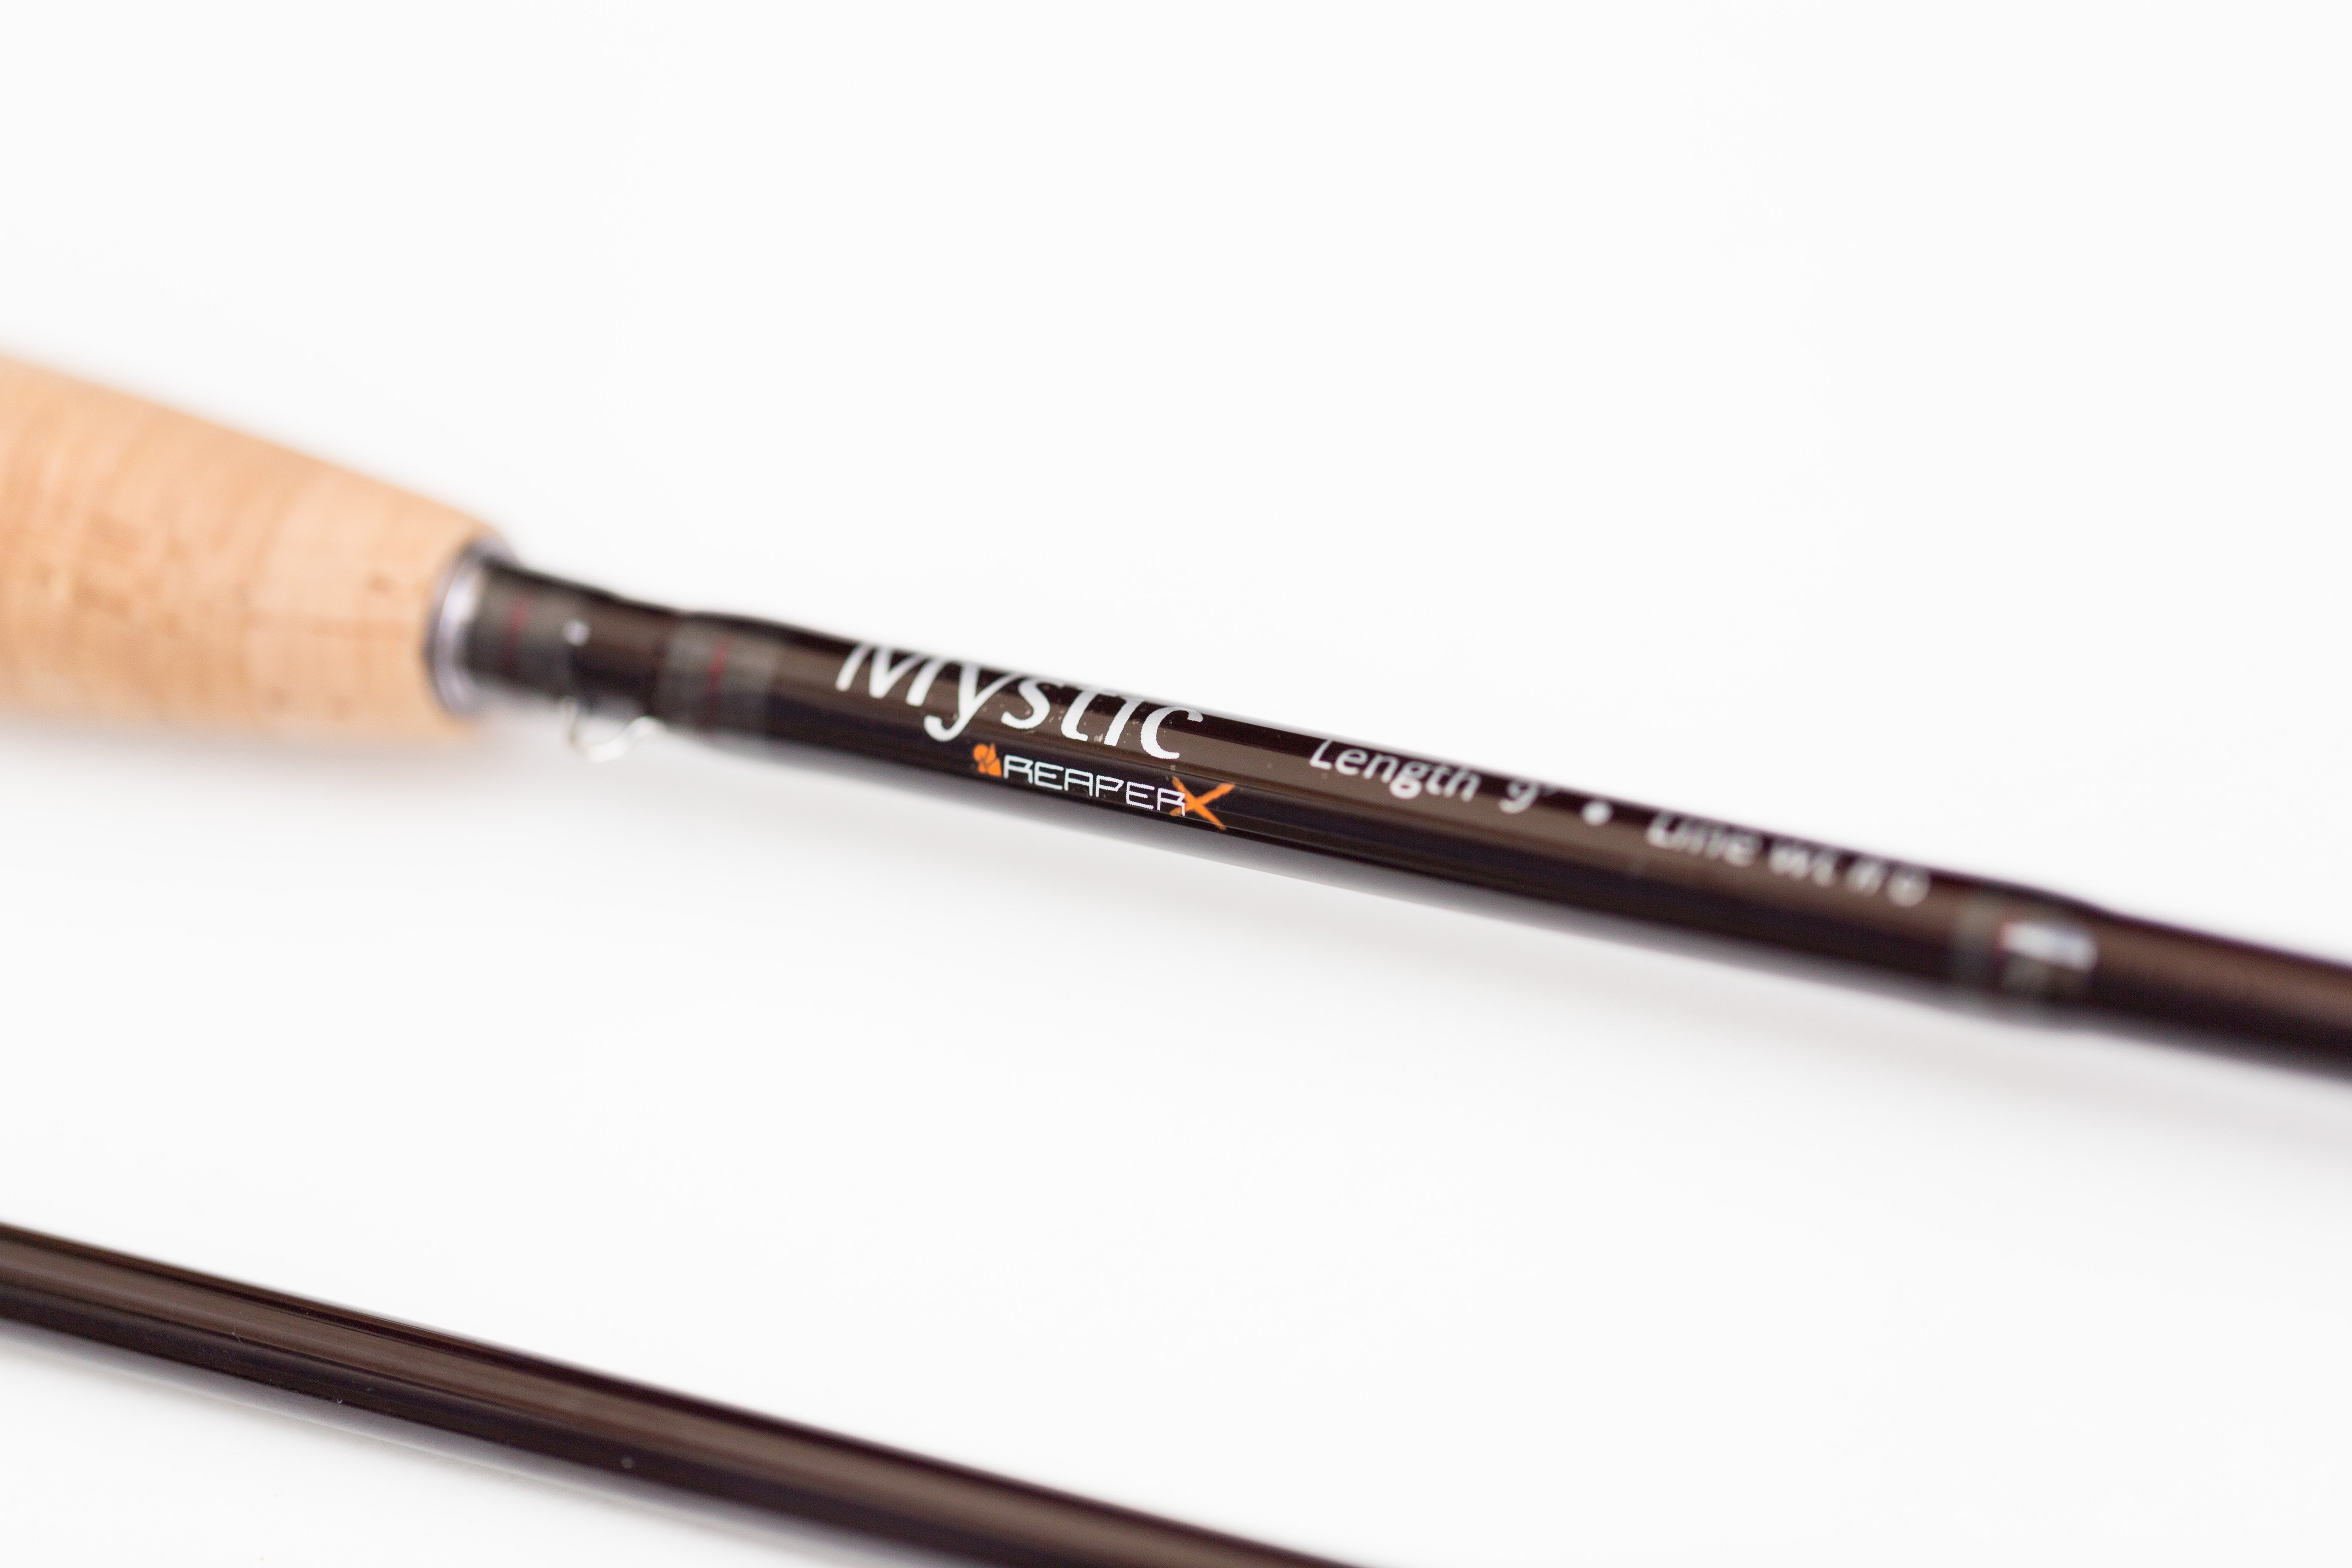 Reaper X Freshwater & Saltwater Fly Fishing Rod